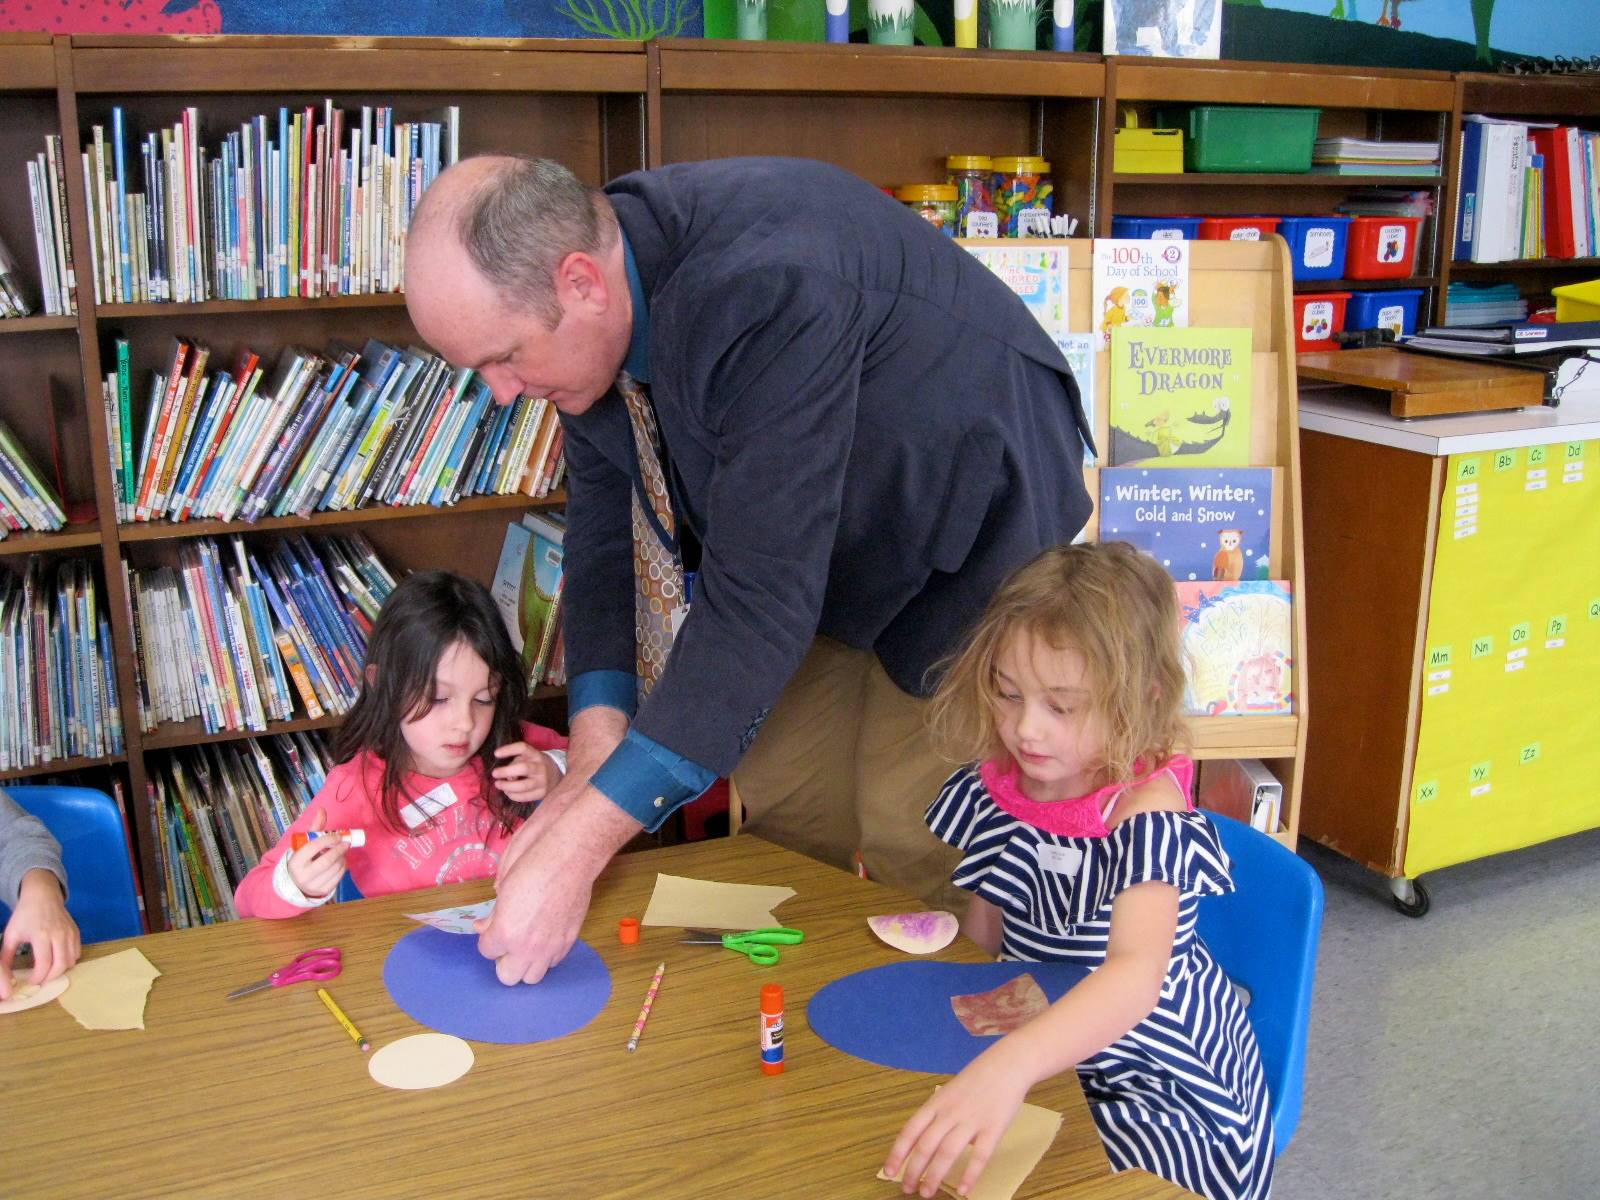 Mr. Ryan assisting students during 100th day activities